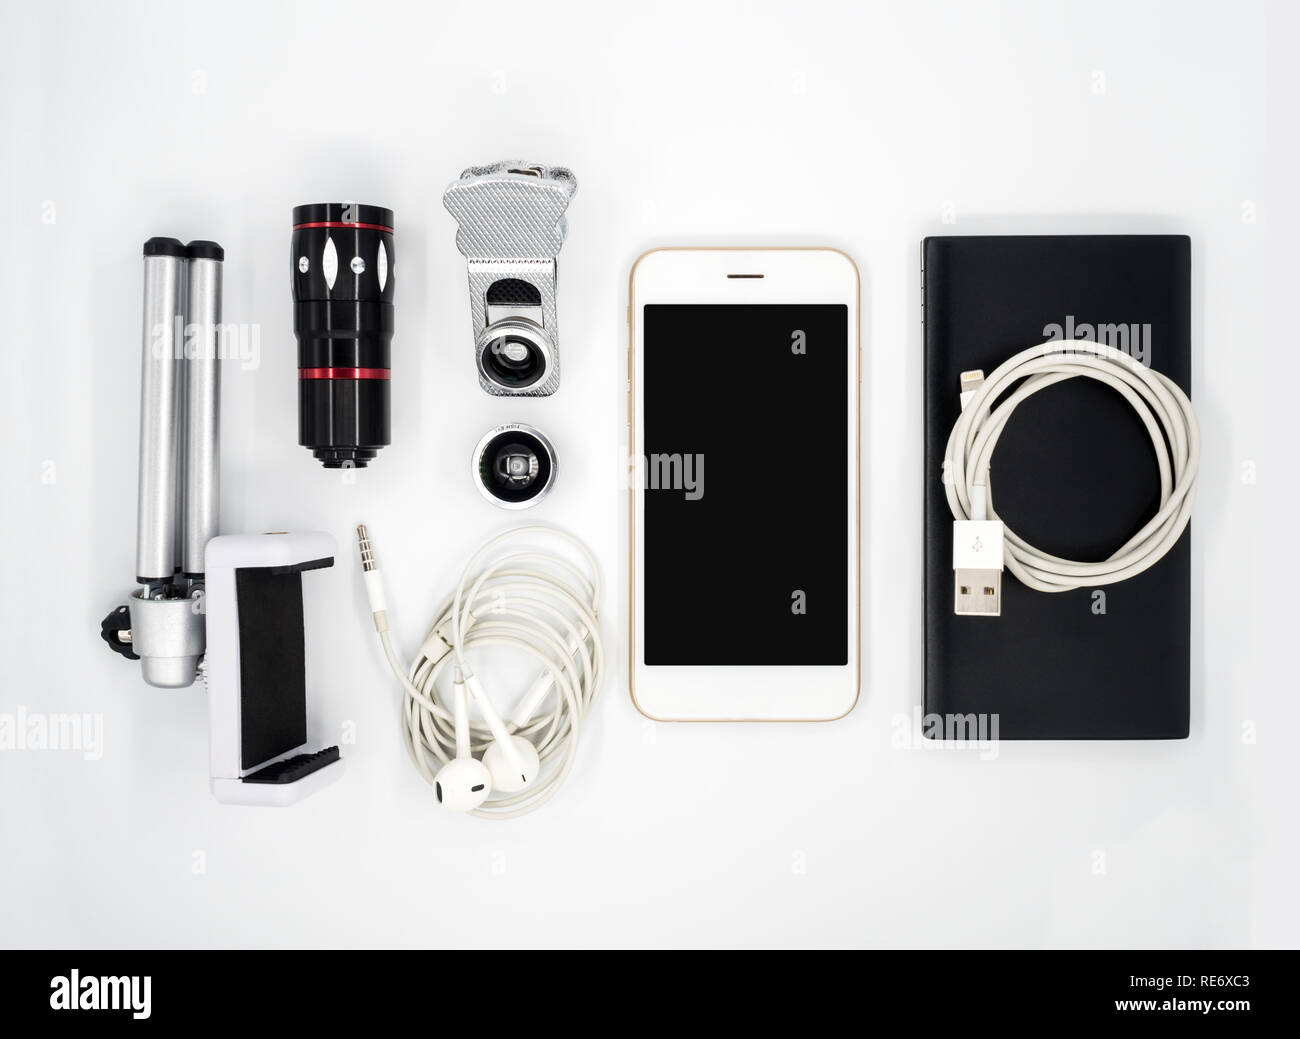 Flat lay (Top view) image of accessories (Tripod Phone Holder, Universal Clamp Camera Lens, Earphone, Power Bank, USB Charger Cable) around smartphone Stock Photo